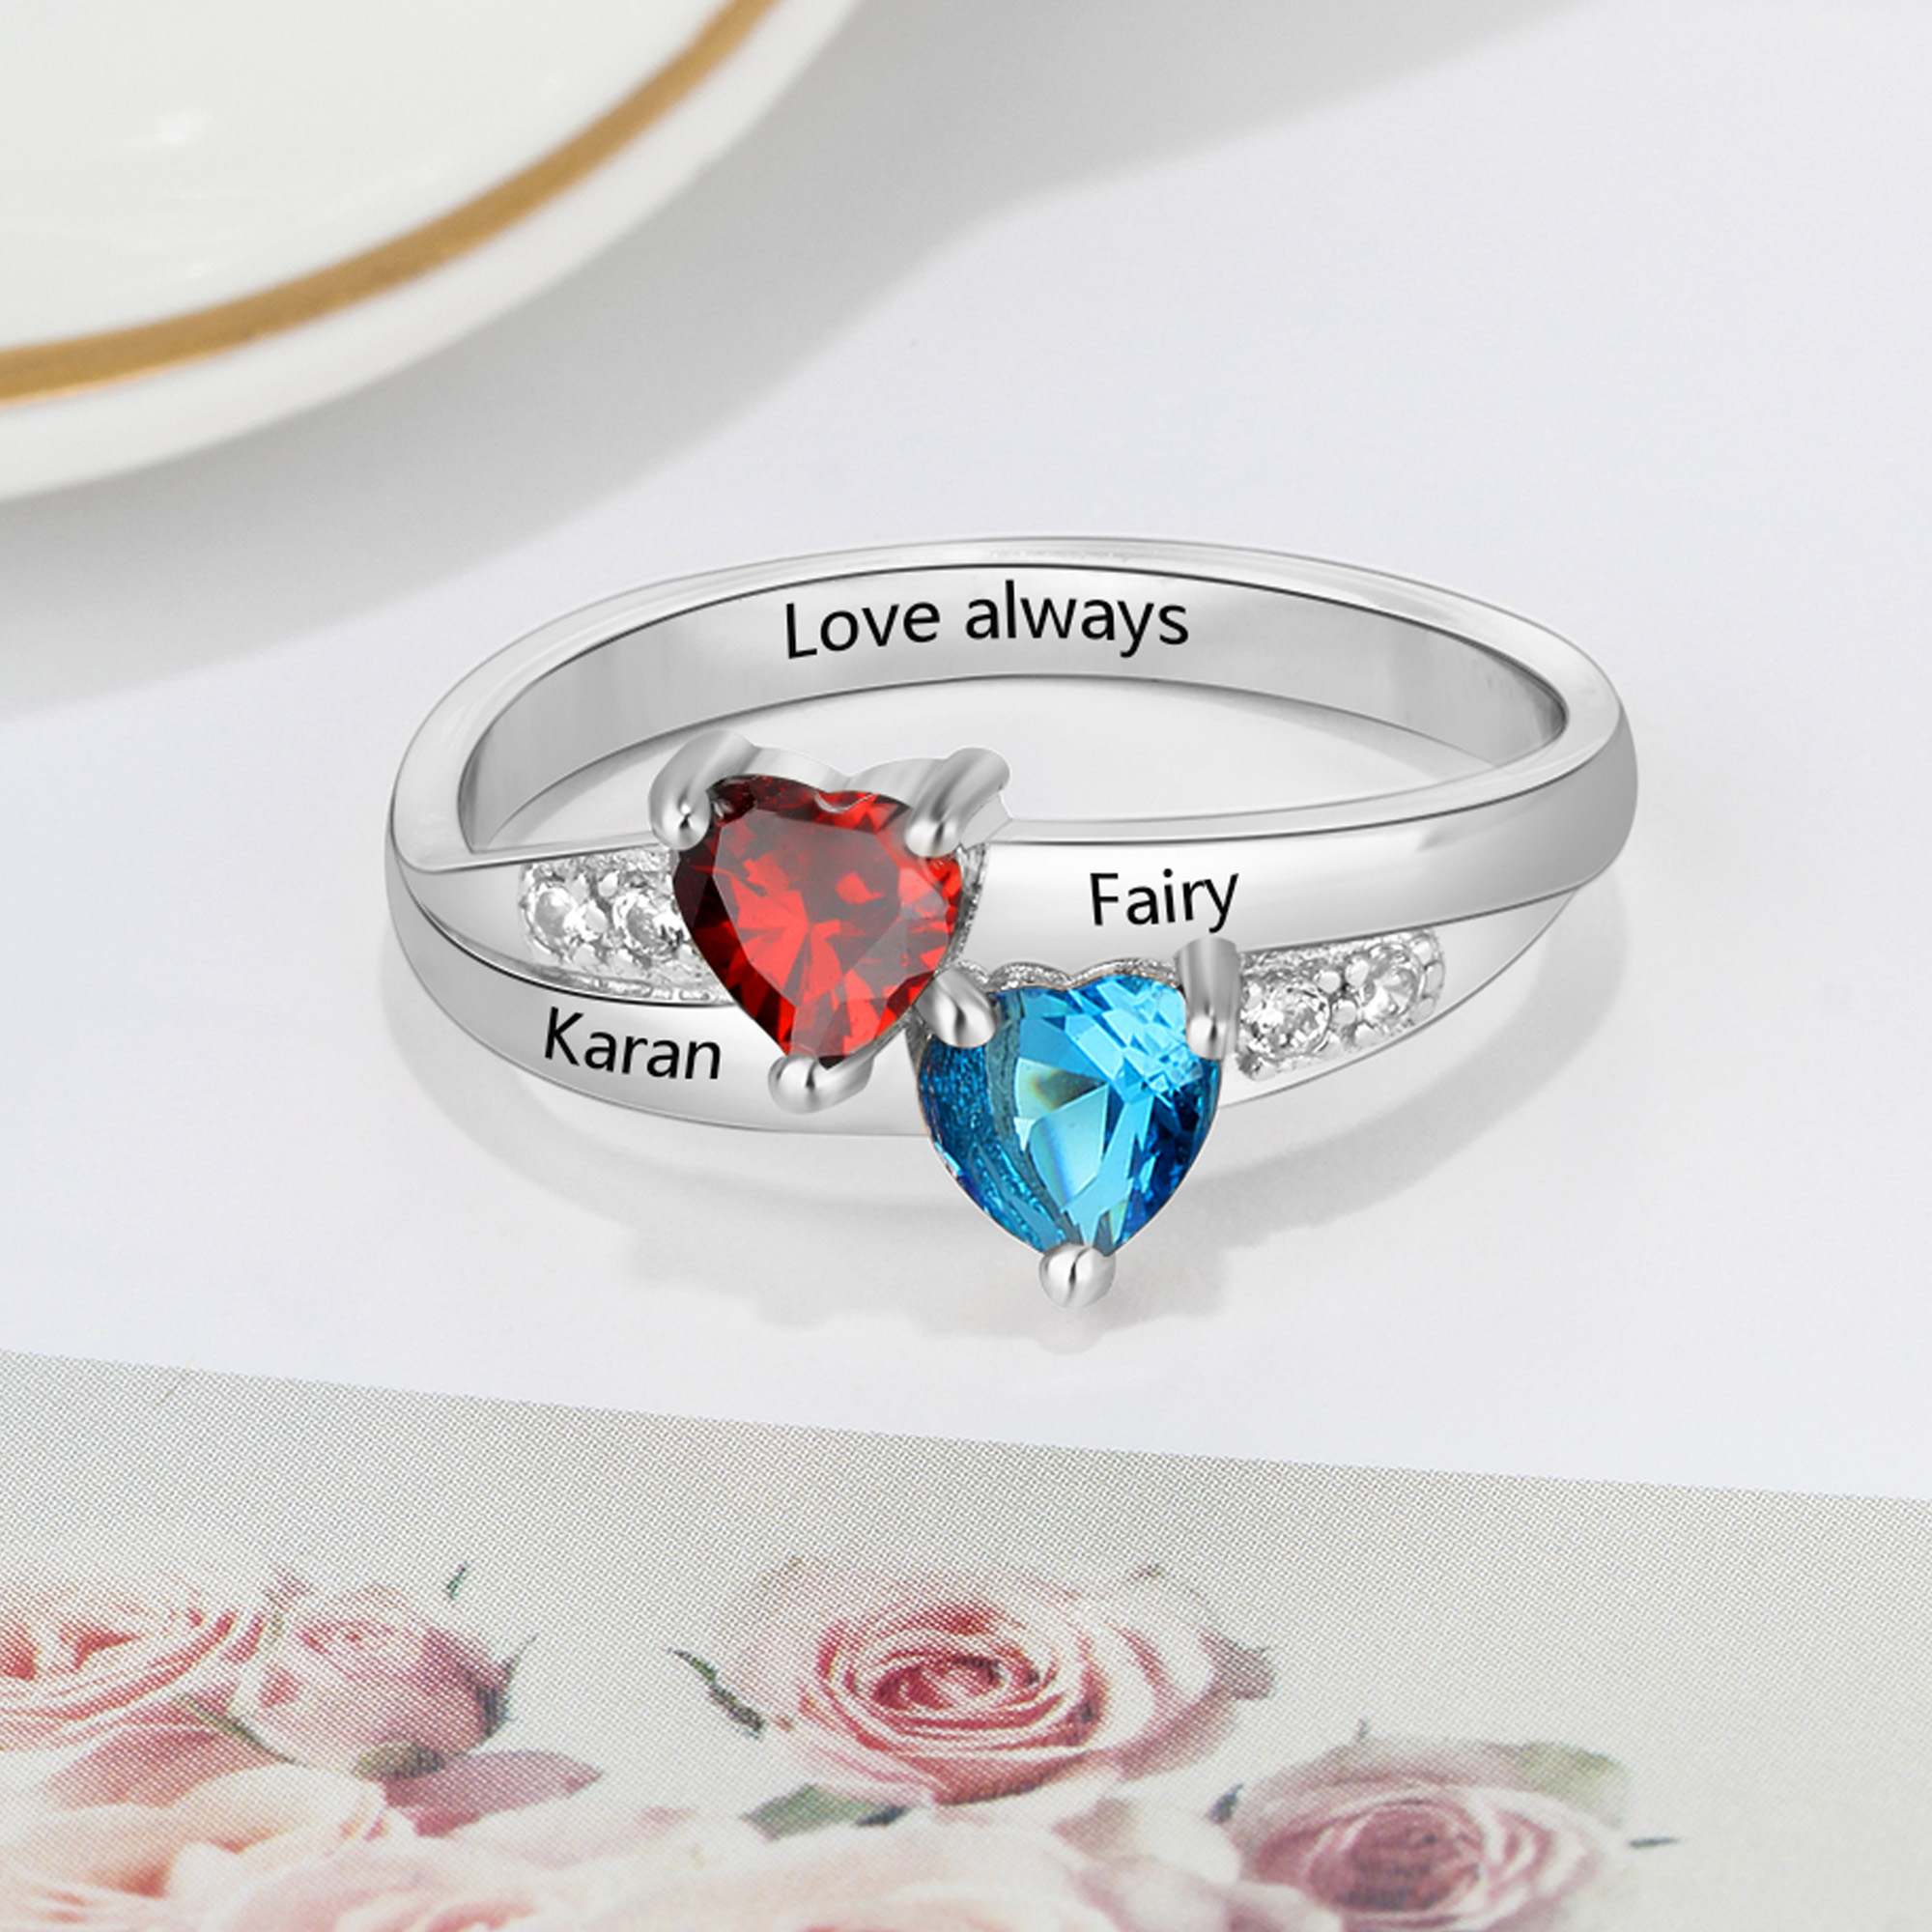 Personalized Mementos Jewelry Sterling Silver Family Rings for Women ...